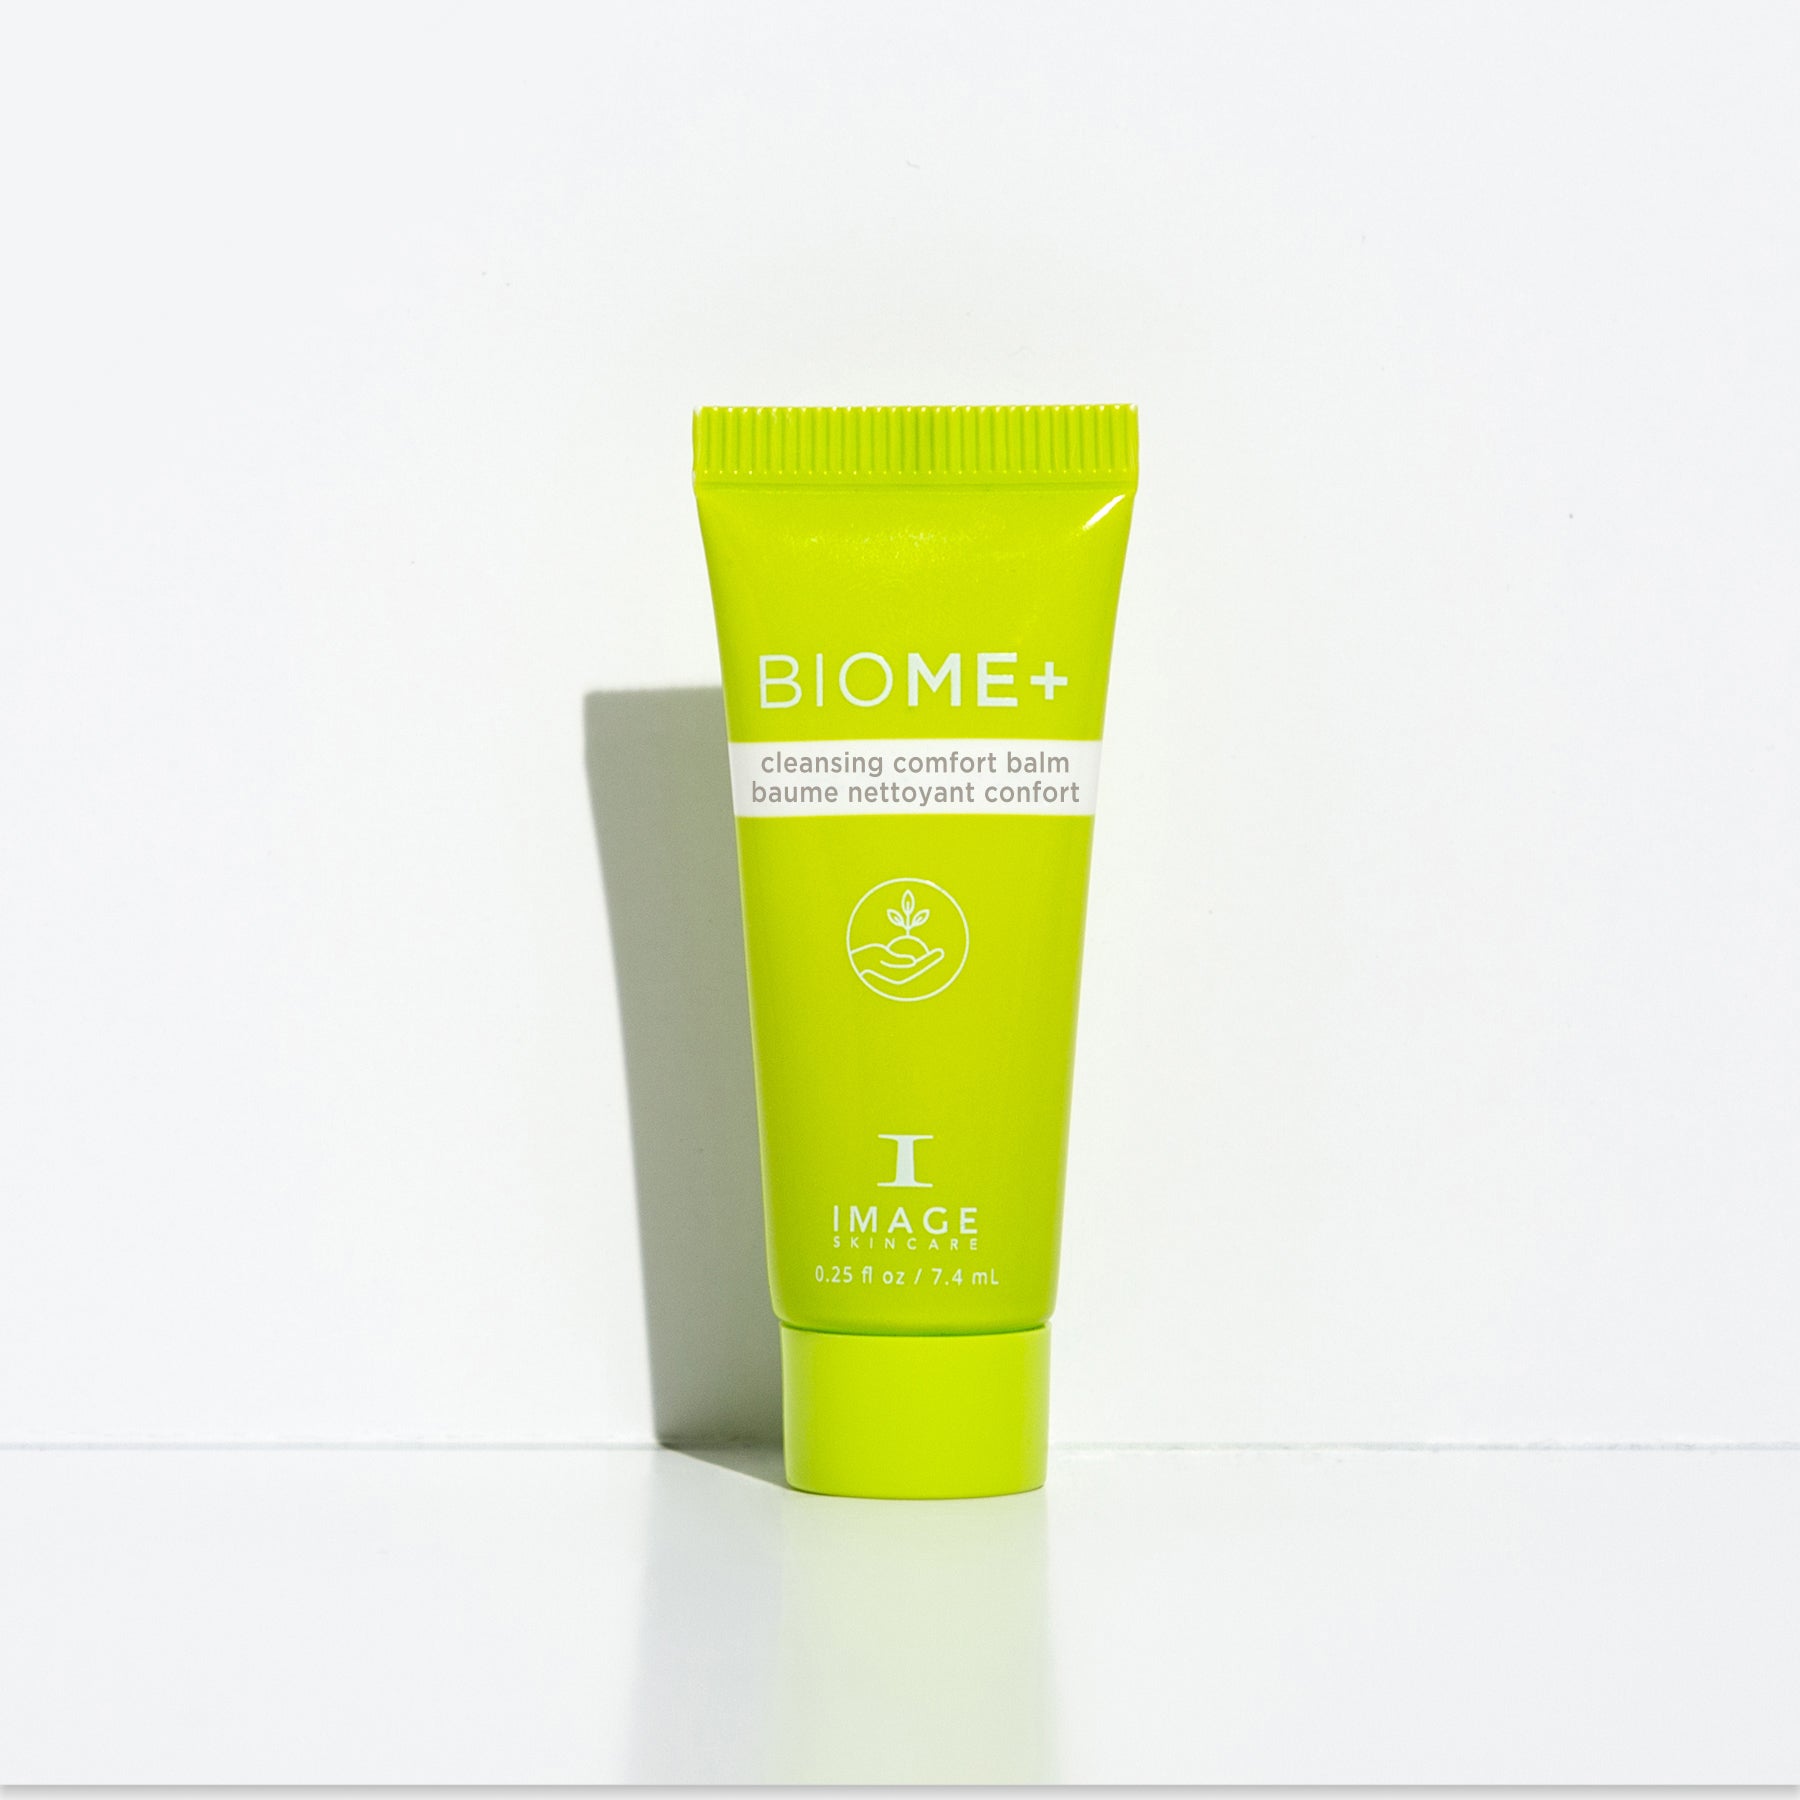 🎁 BIOME+ cleansing comfort balm sample (50% off)